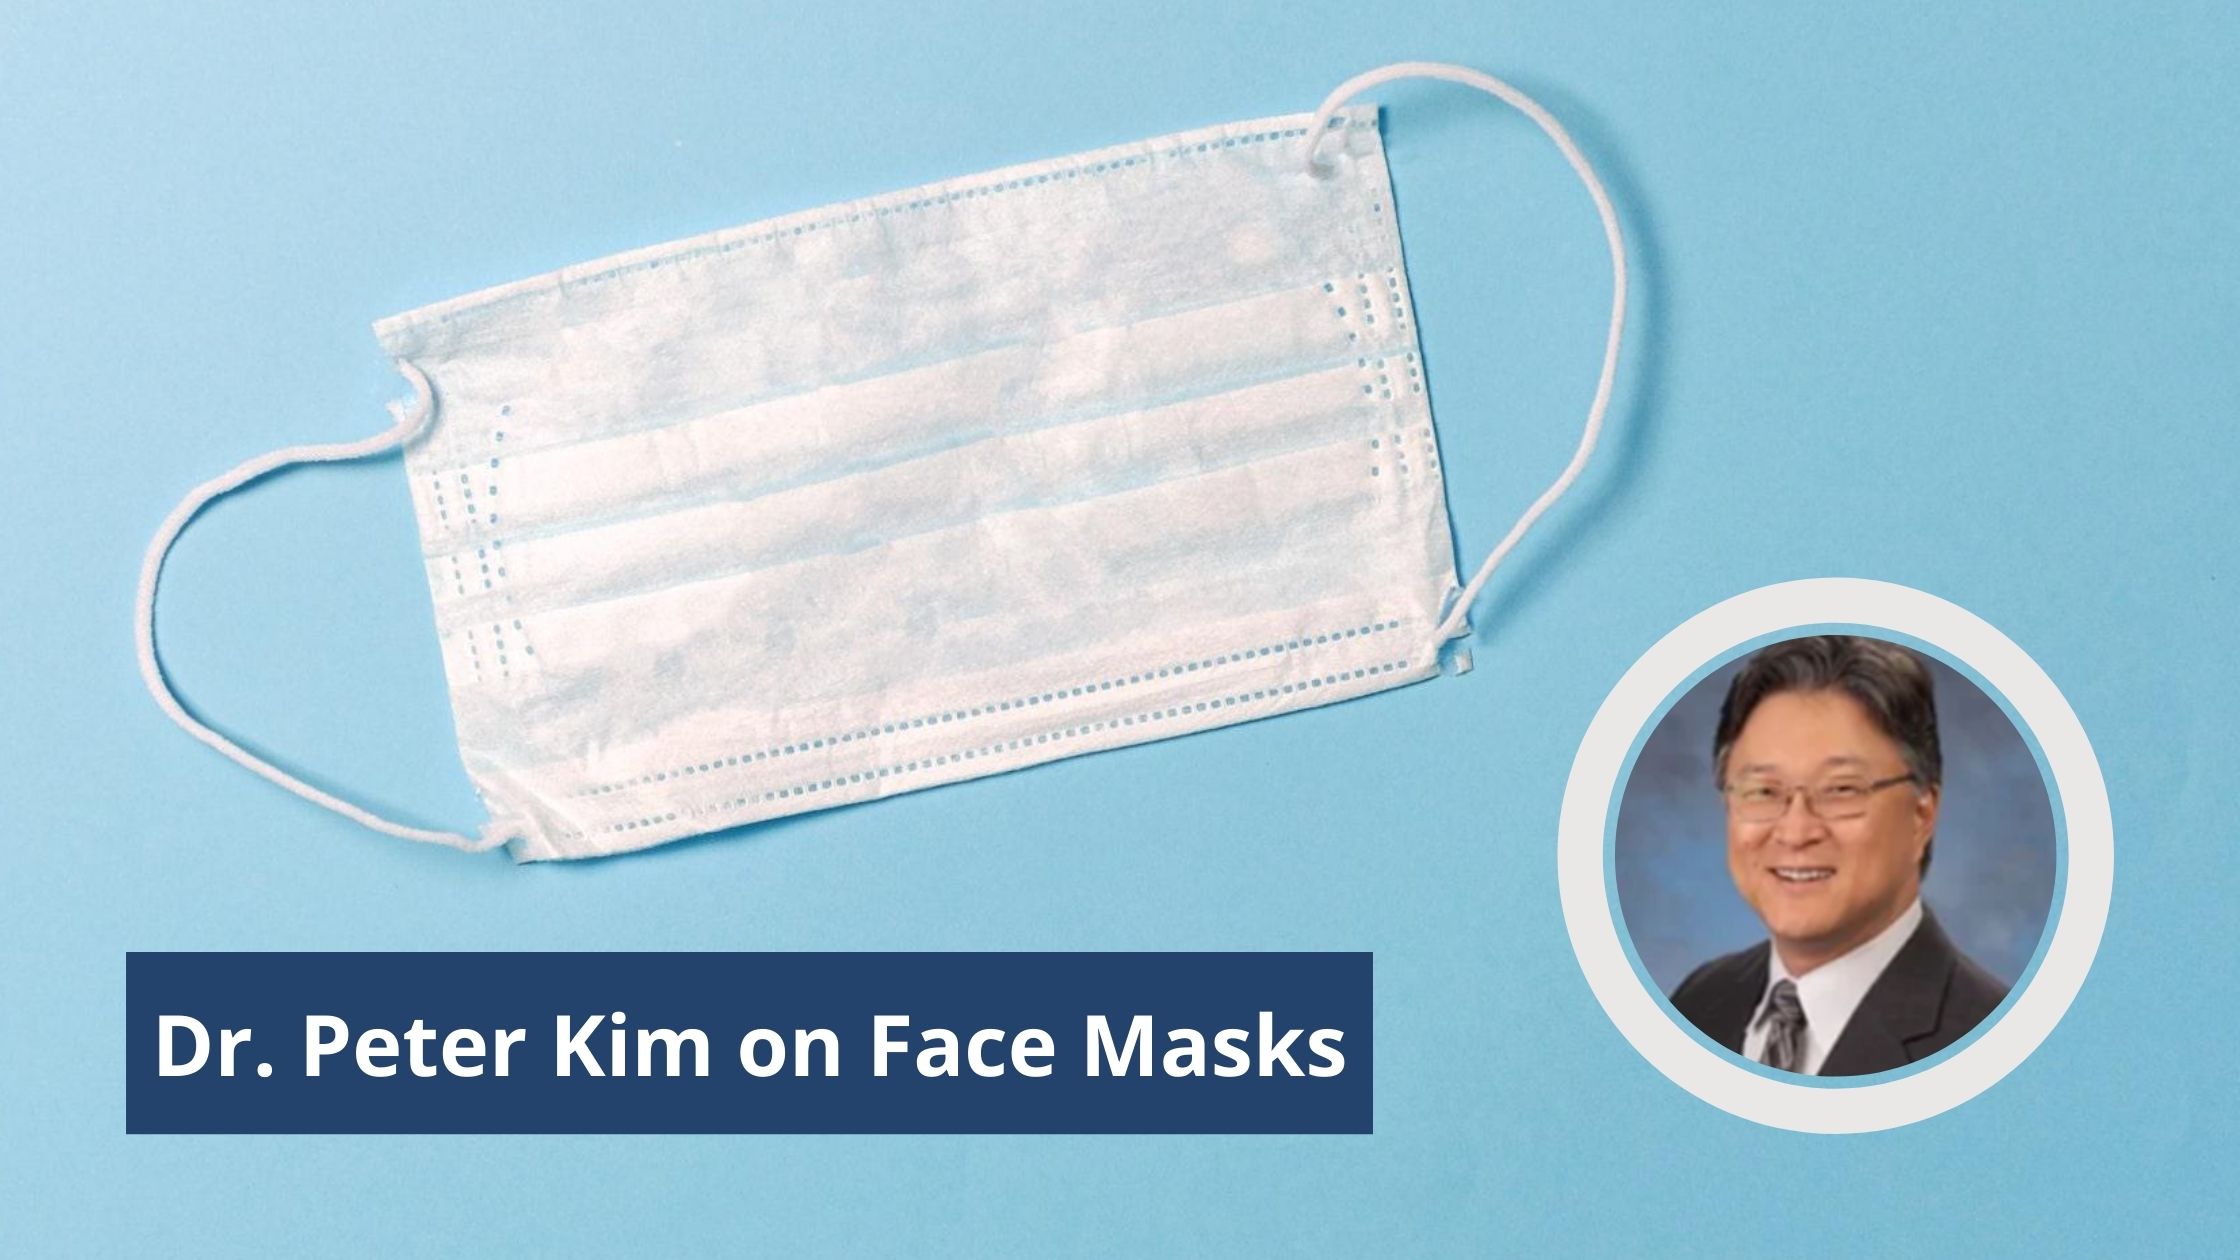 5-Shot Friday for 8/6/20: About Those Masks - Why You Should Wear One - by Dr. Peter Kim, MD